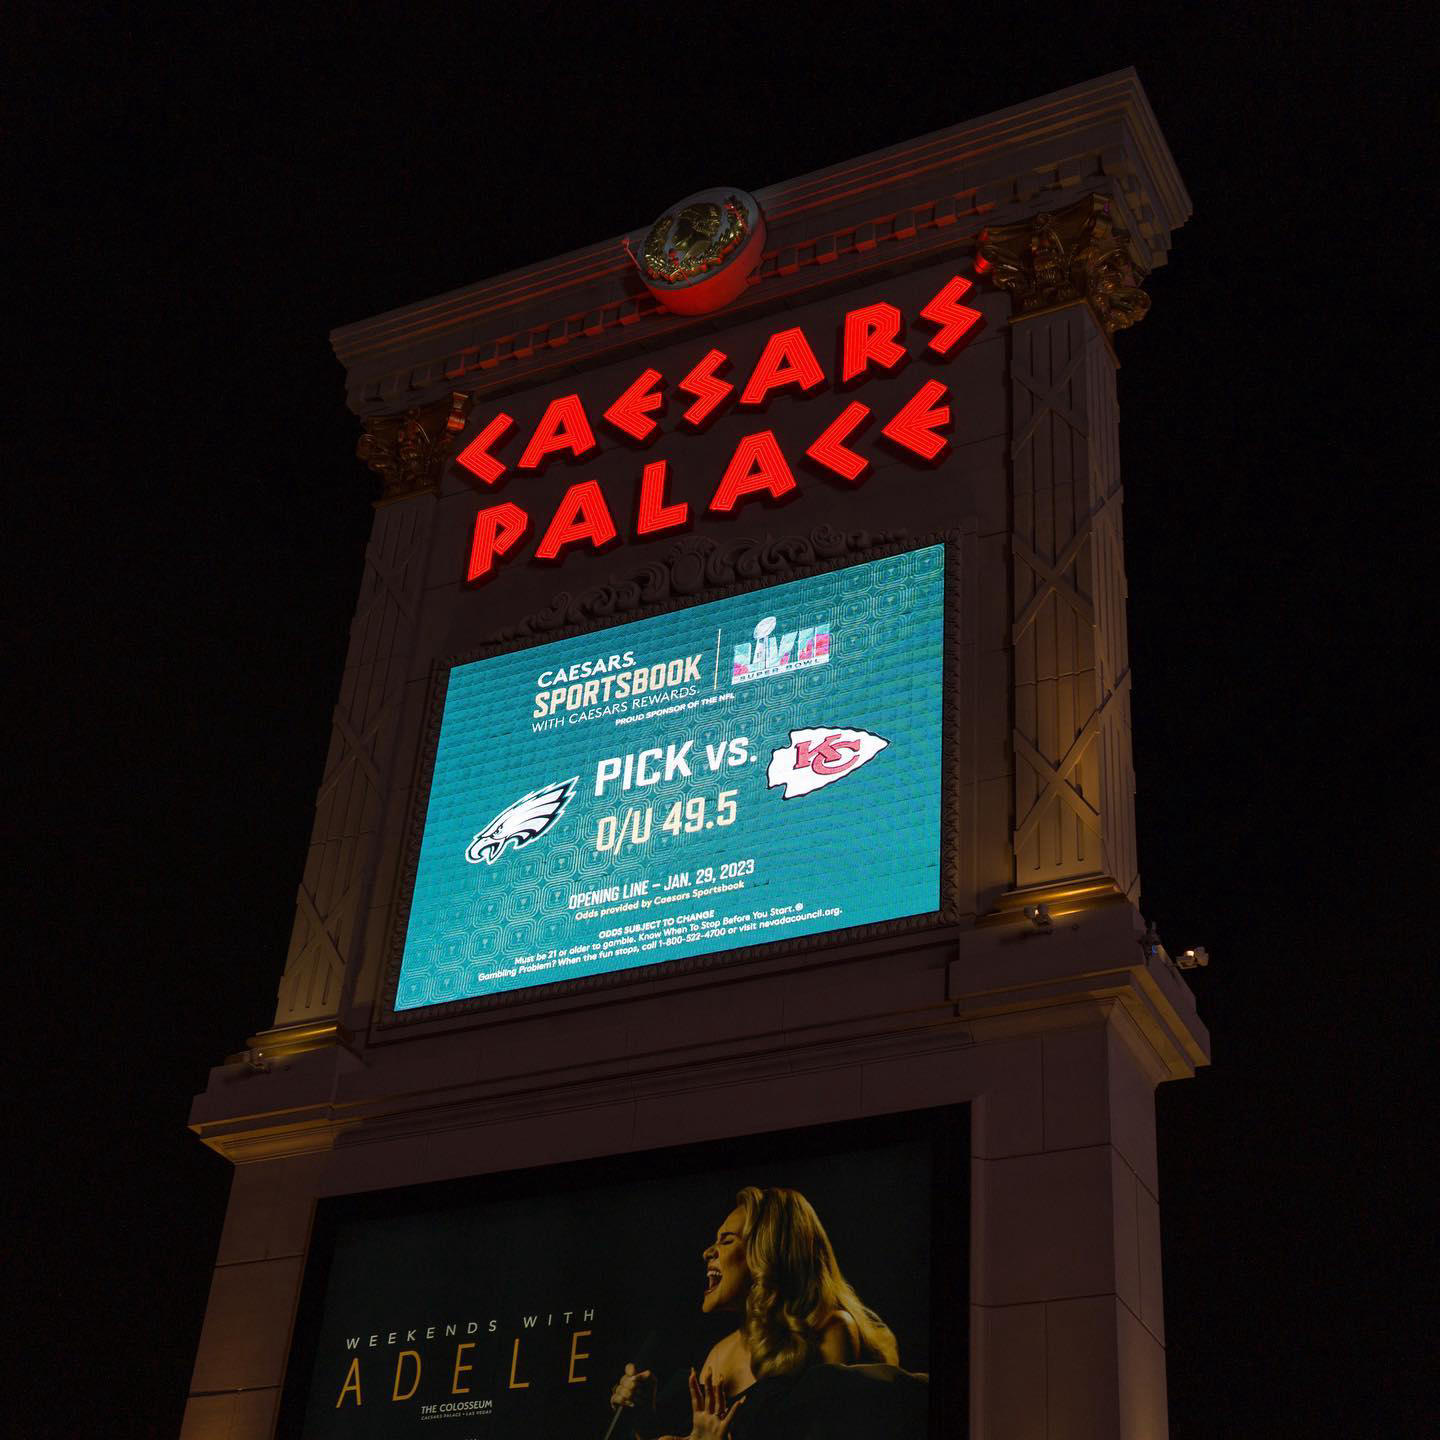 Our opening Super Bowl odds debuted on the #CaesarsPalace marquee last night